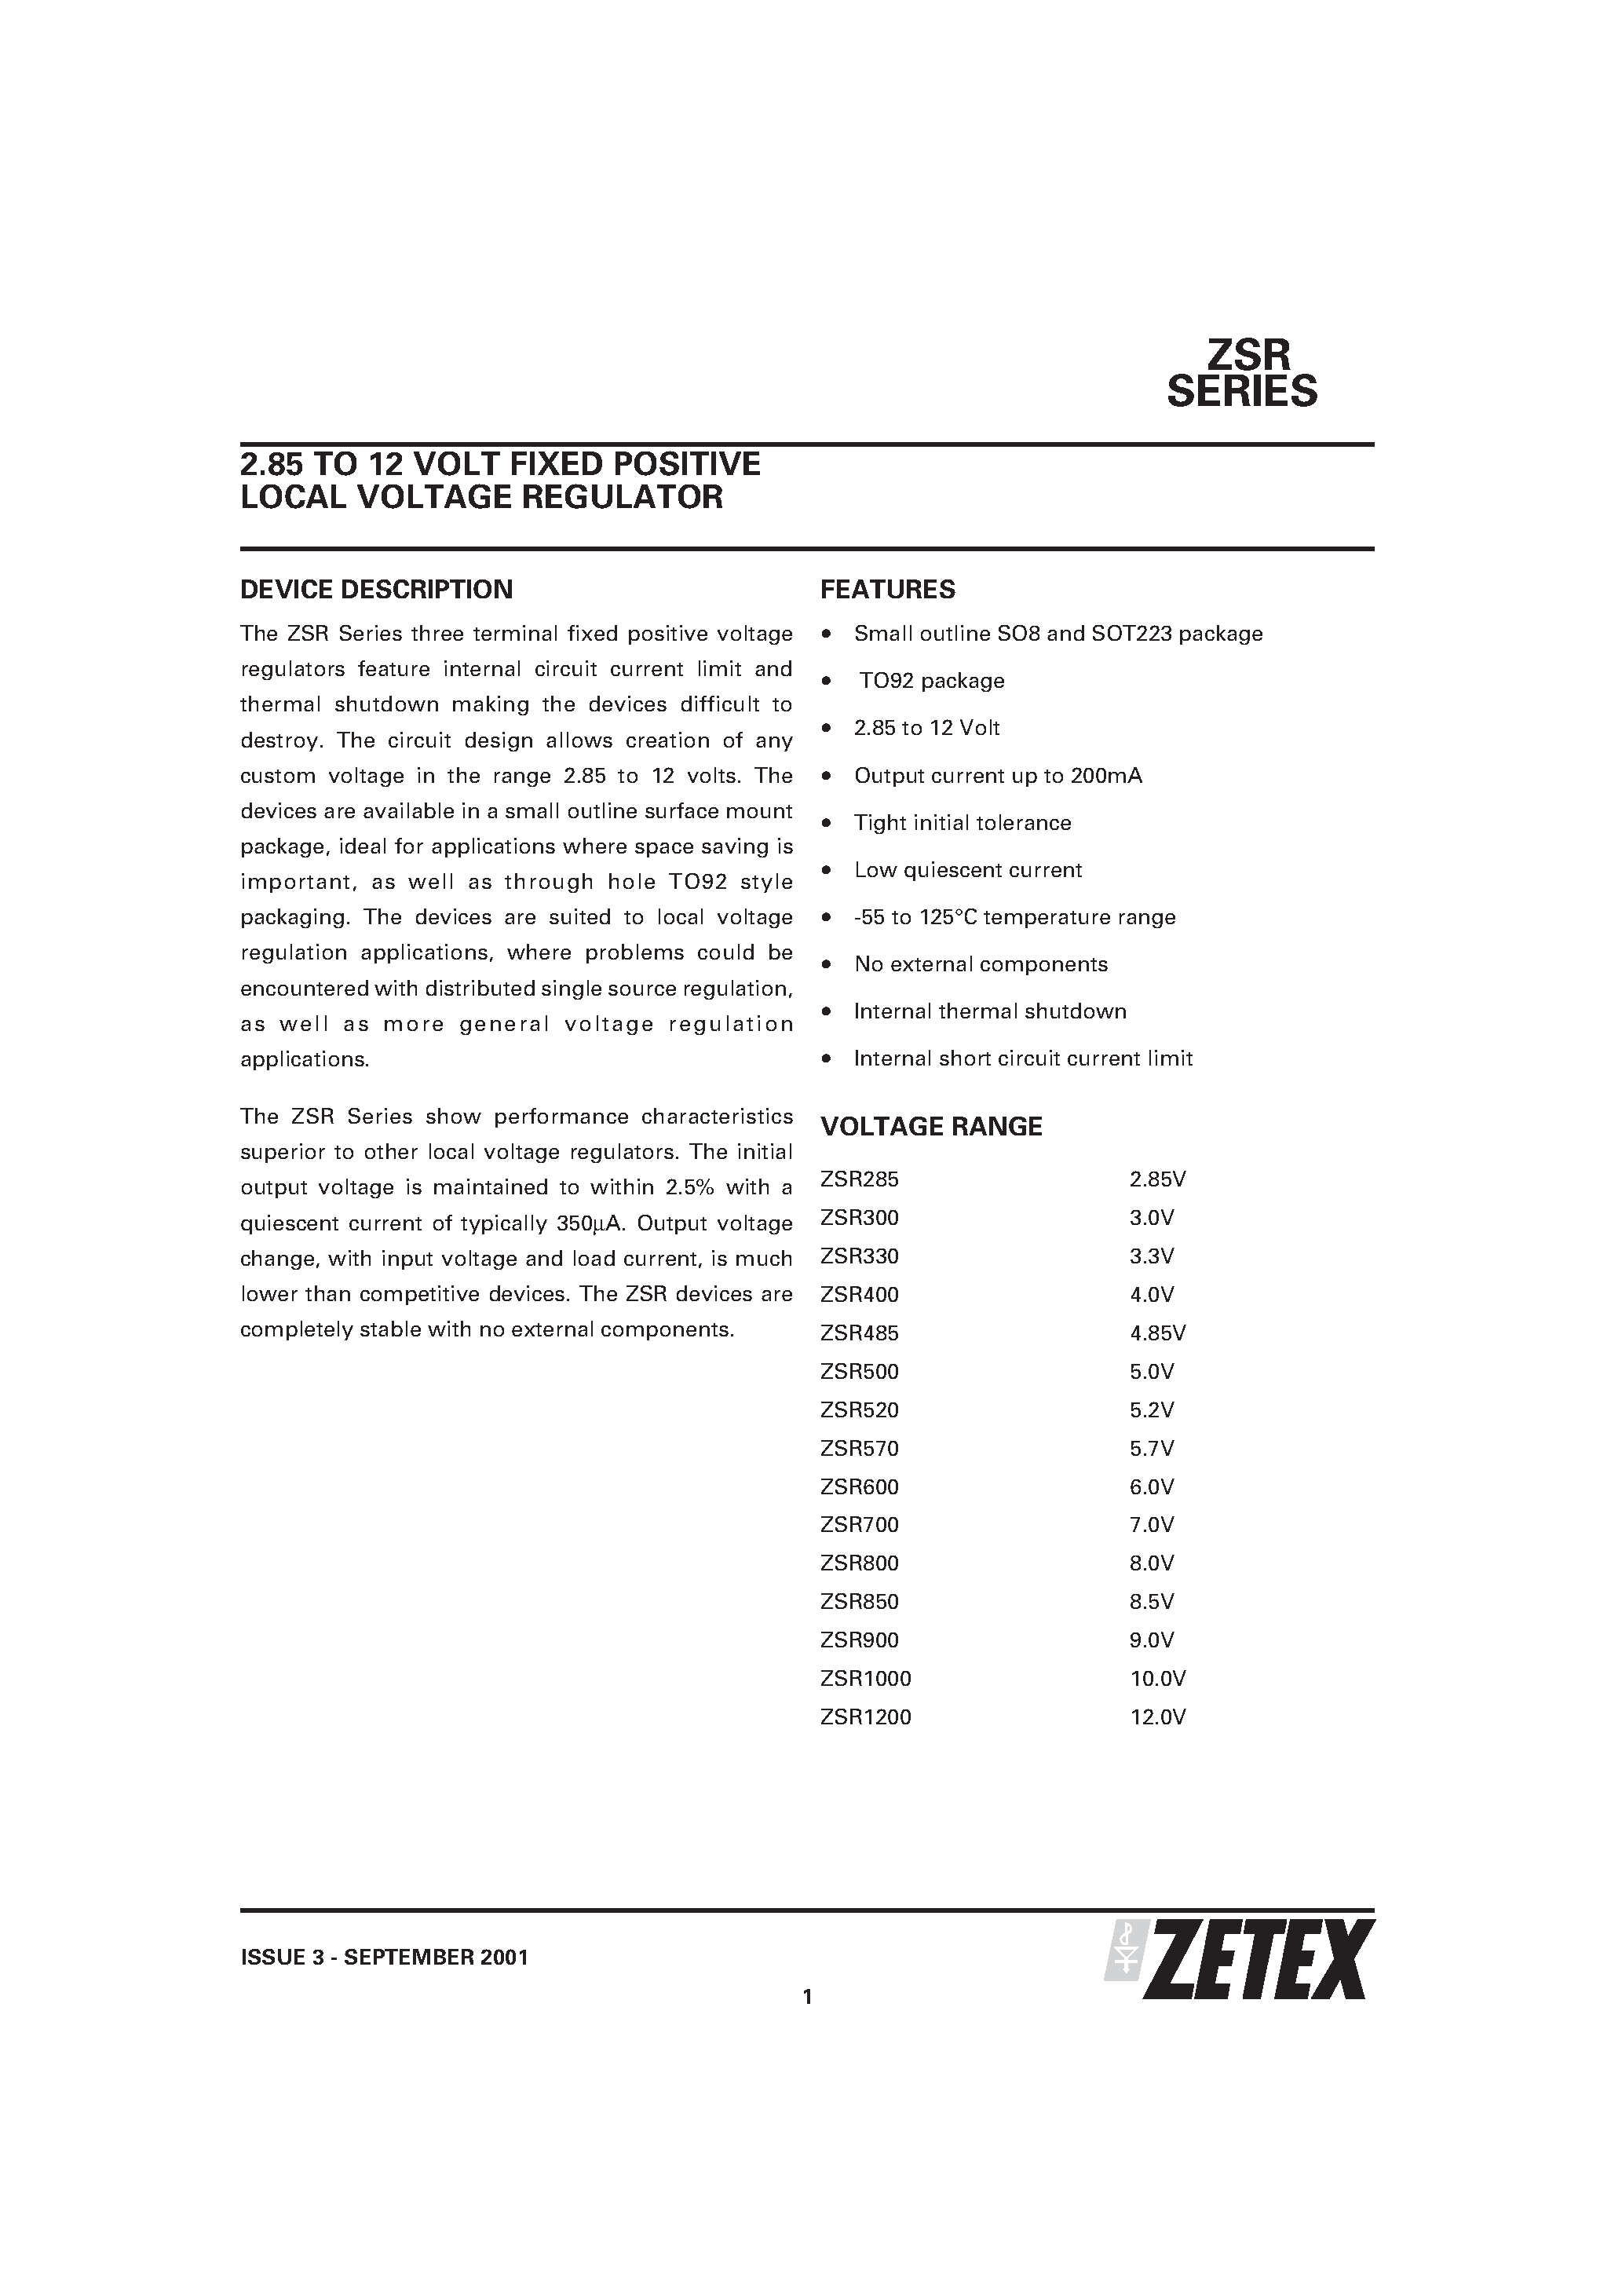 Datasheet ZSR1200G - 2.85 TO 12 VOLT FIXED POSITIVE LOCAL VOLTAGE REGULATOR page 1